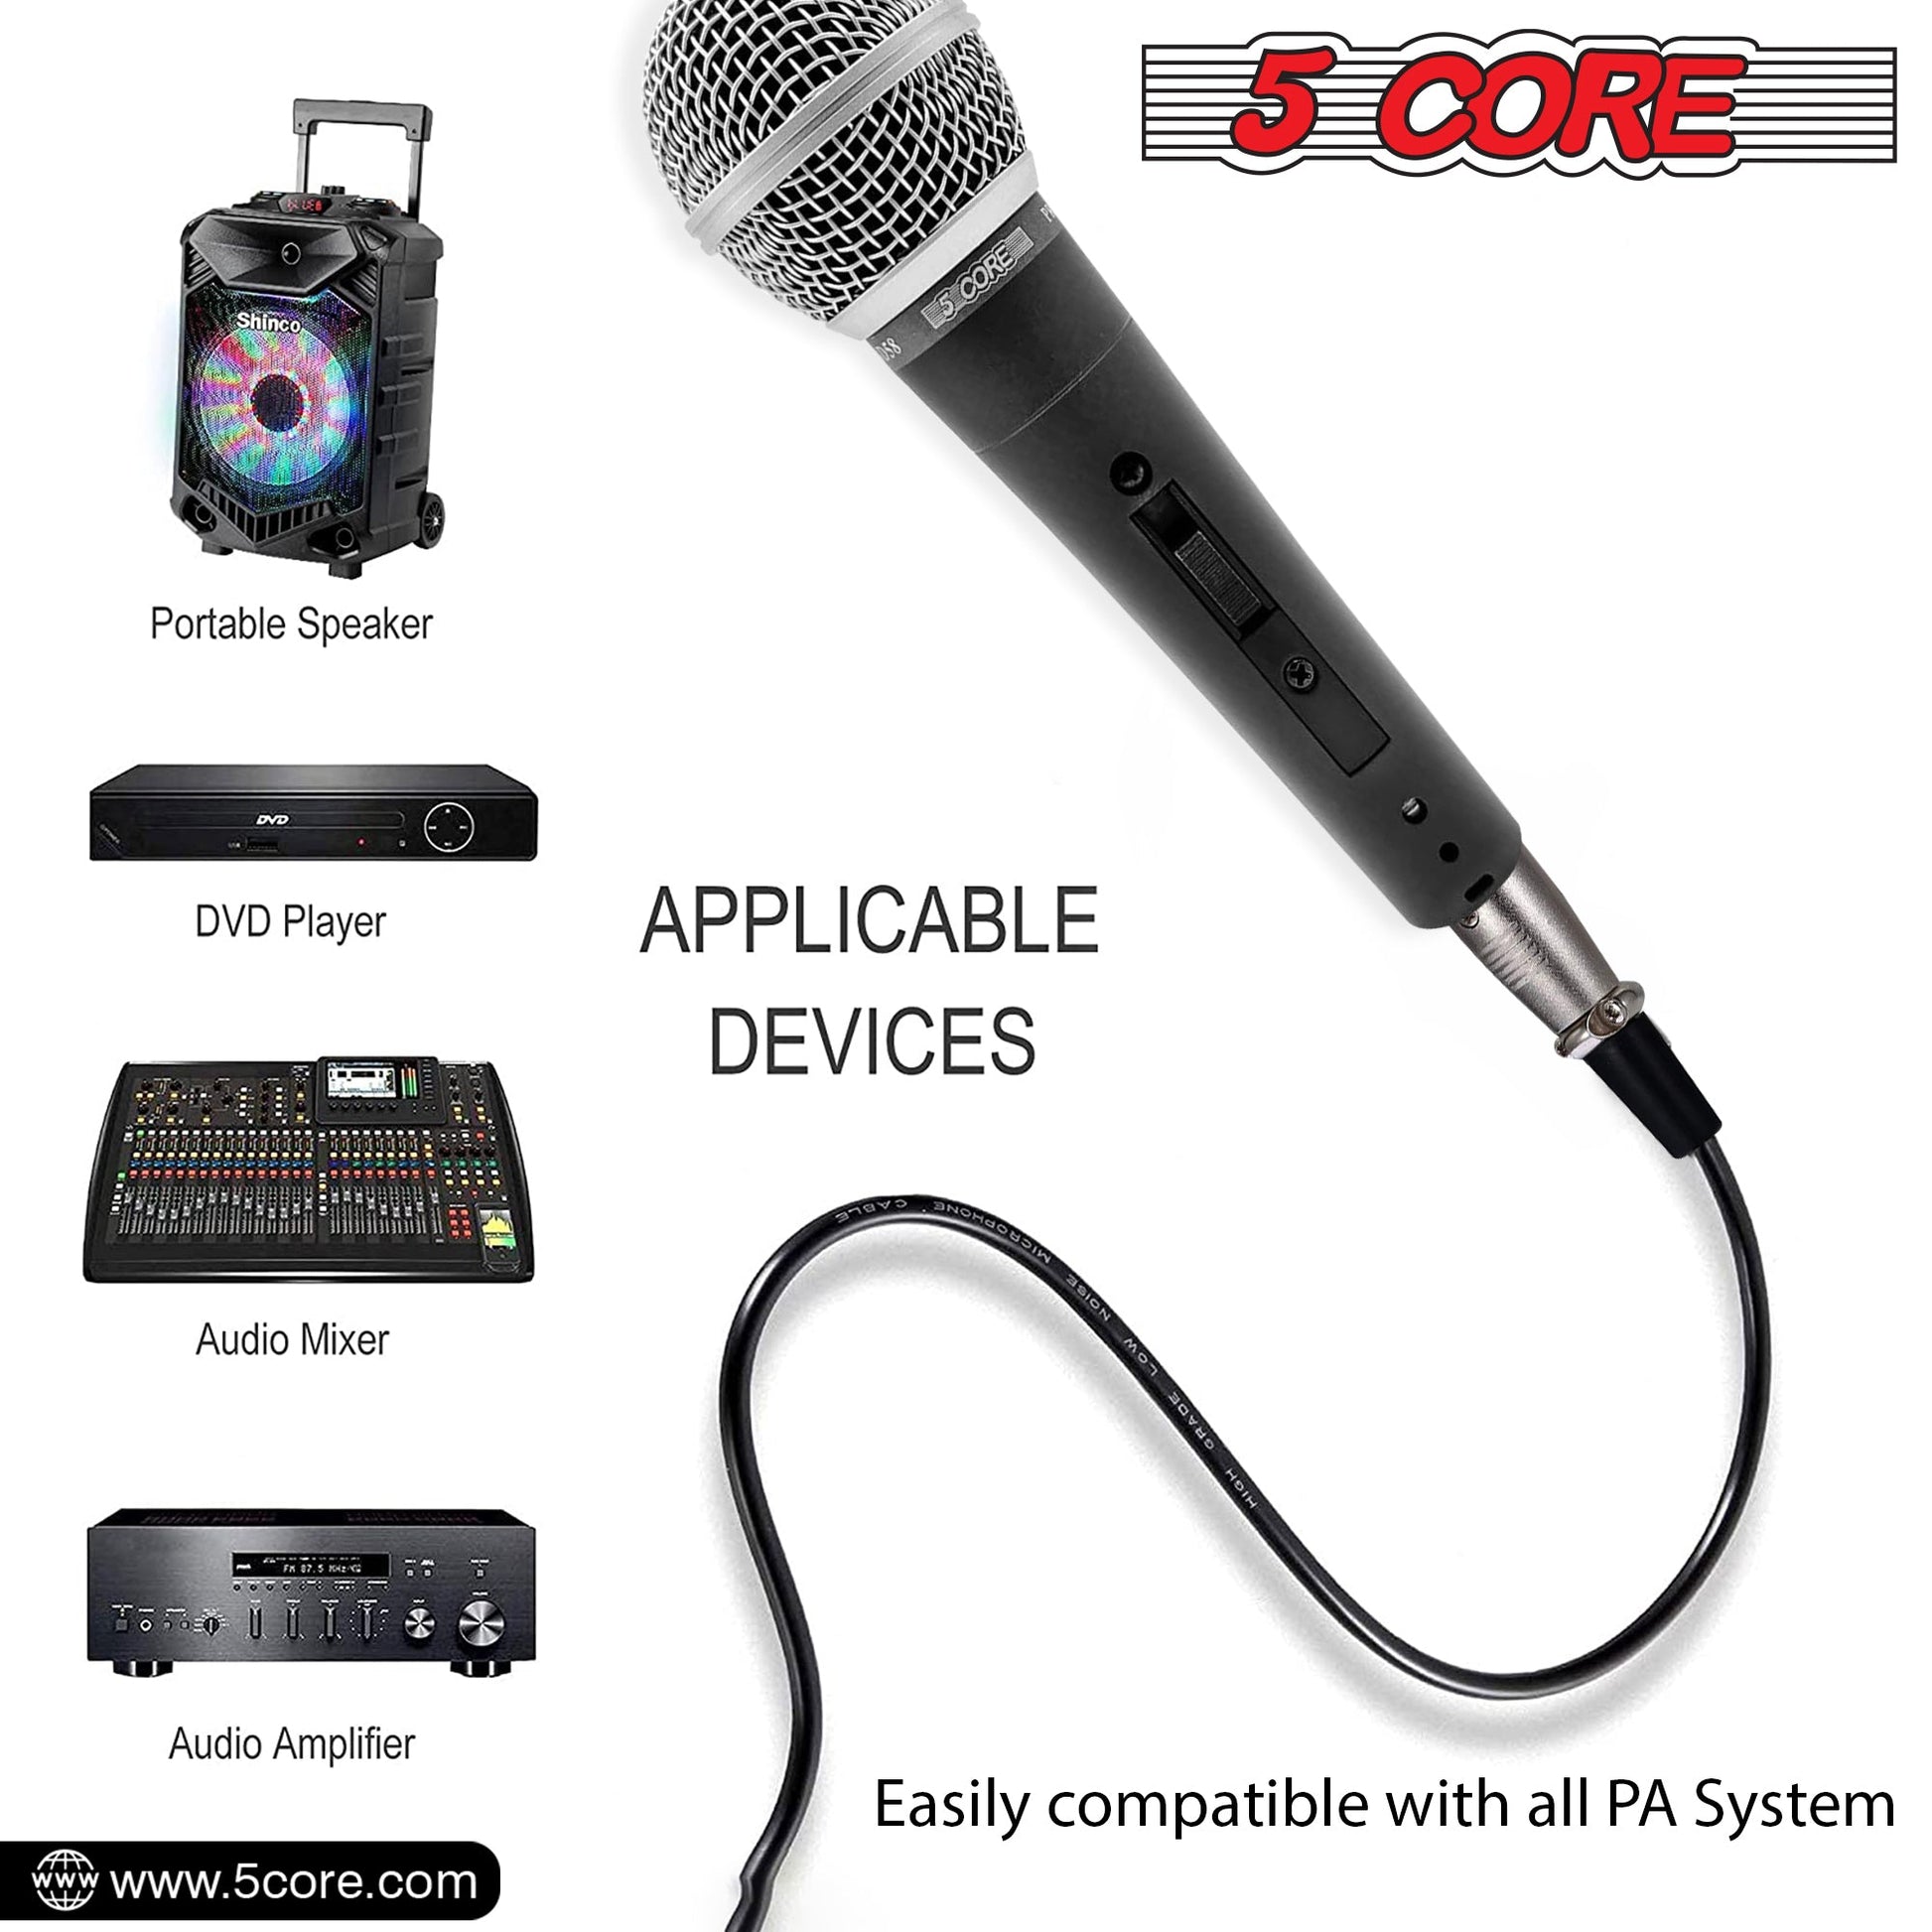 The 5 Core Premium Vocal Dynamic Cardioid Handheld Microphone and Stand combo offers high-quality audio support for karaoke singing and other activities MS DBL+ND58+ND57-6